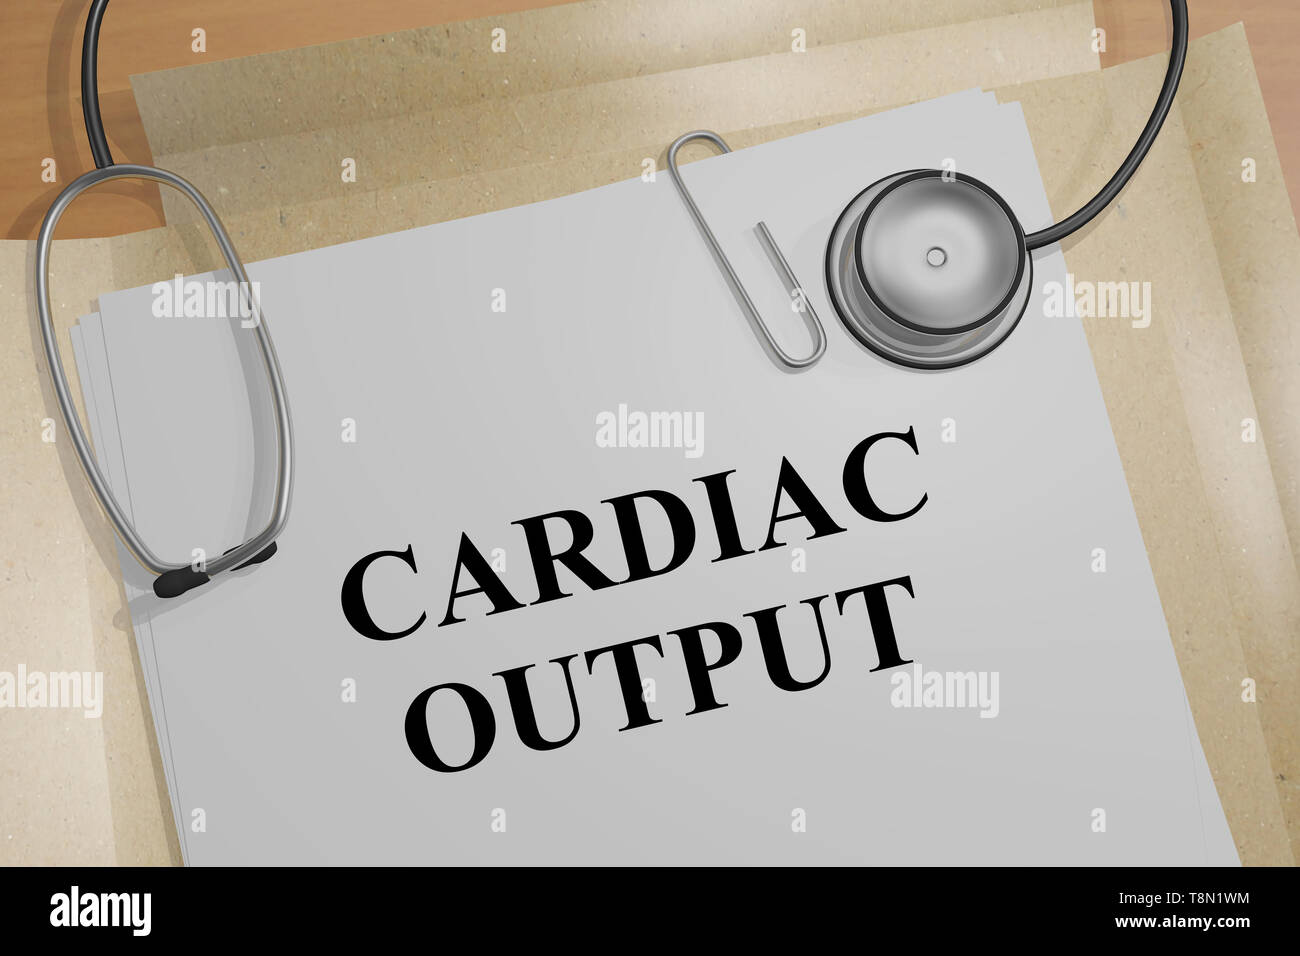 3D illustration of CARDIAC OUTPUT title on a medical document Stock Photo